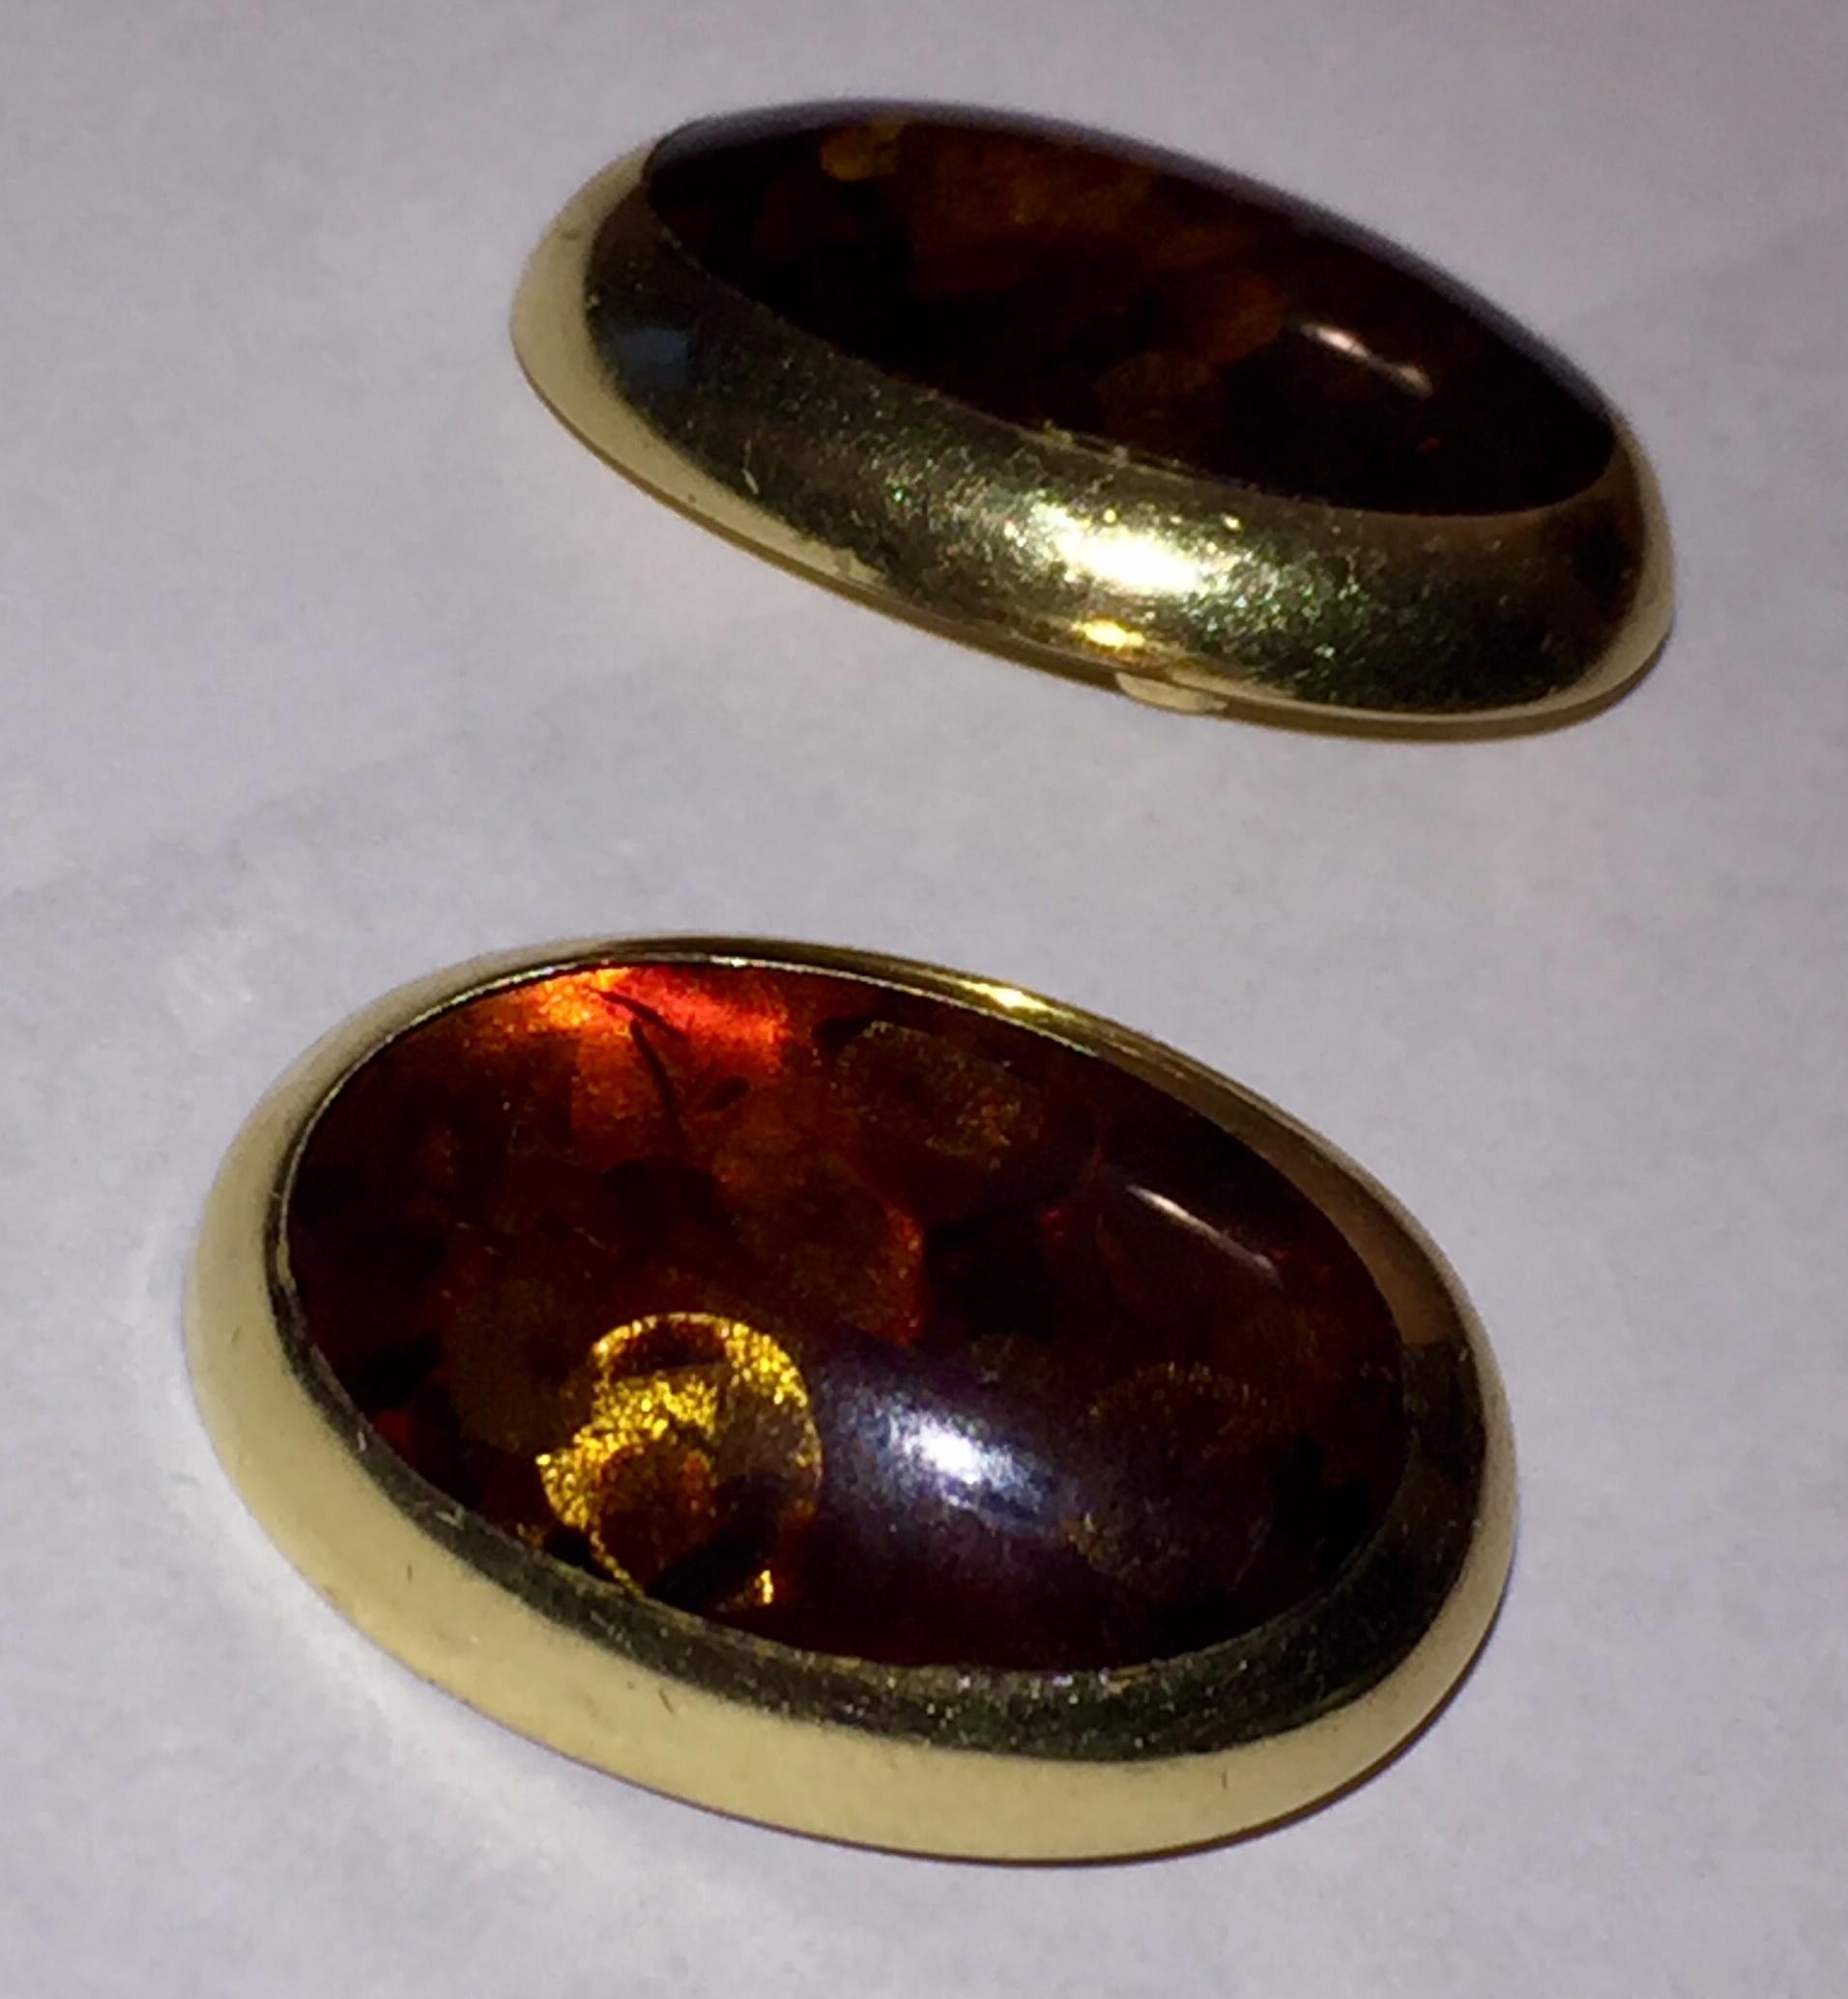 14 karat yellow gold Willy Fagert clip on earrings with orange Baltic amber. Measures 1.5” long by 1” wide. Marked, Halbertstadt, 585, Willy Fagert, Handmade Denmark. Weighs, 27.7 grams